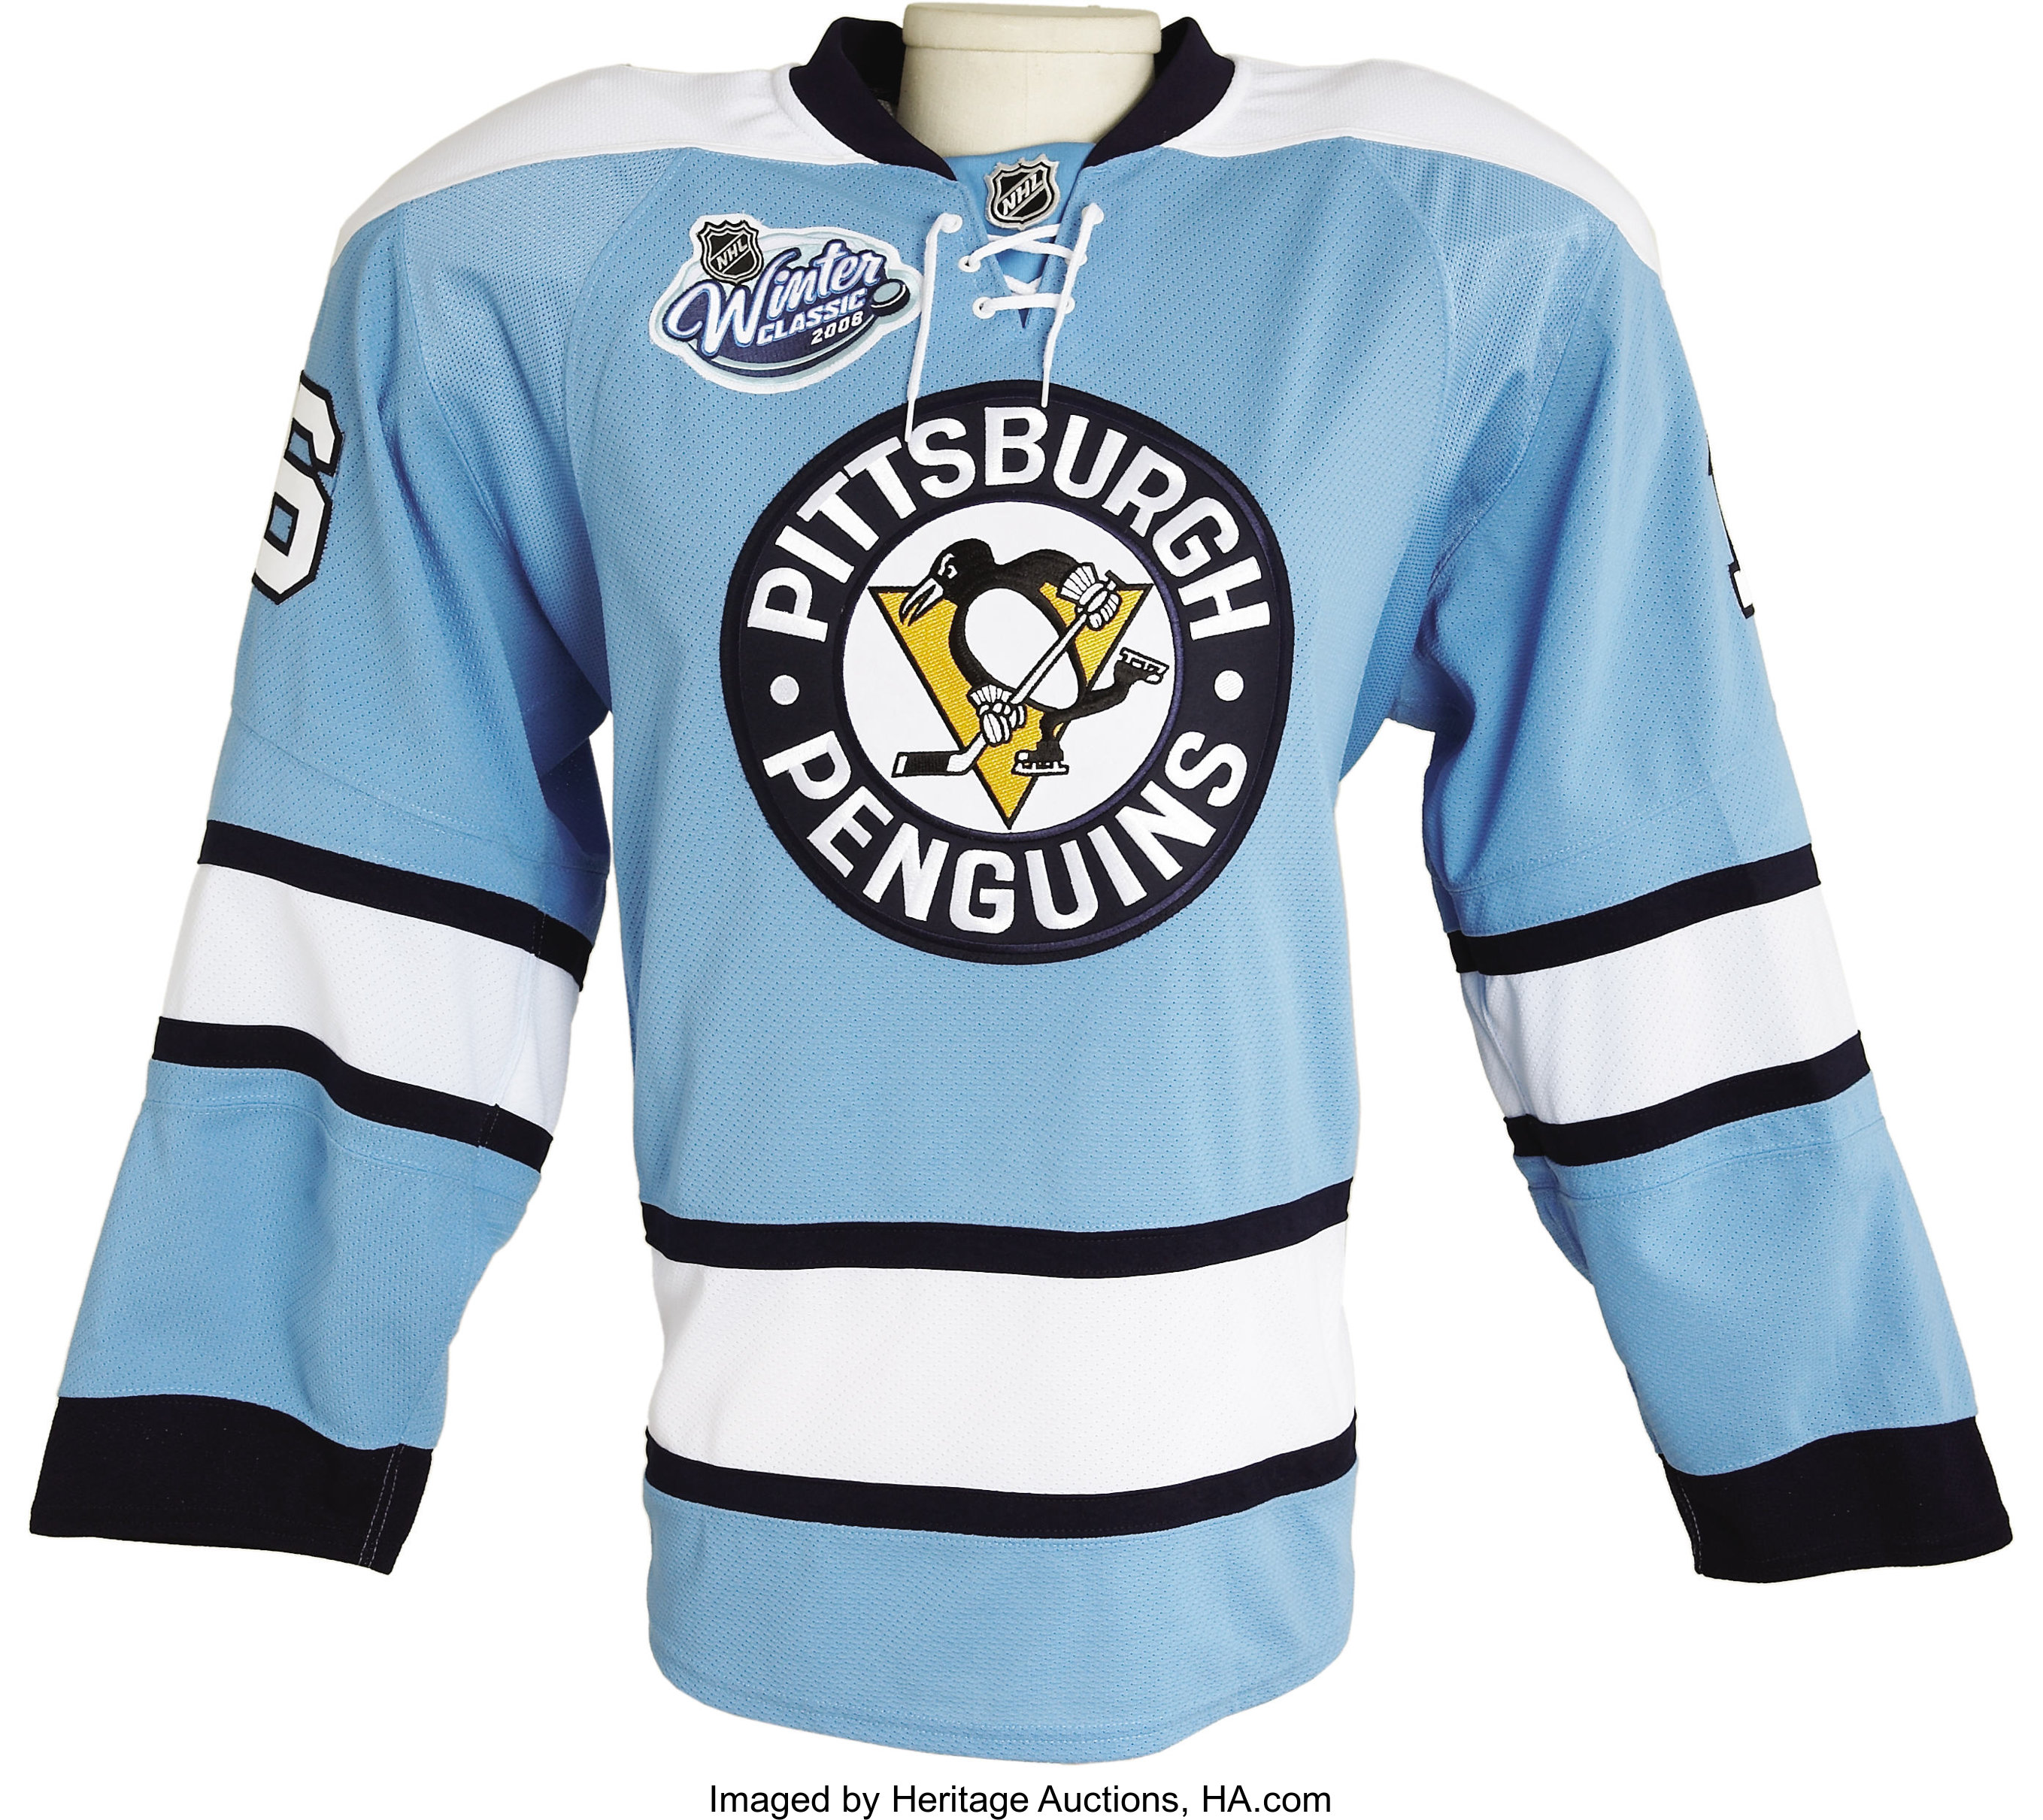 Penguins go back to 1925 for Winter Classic jersey